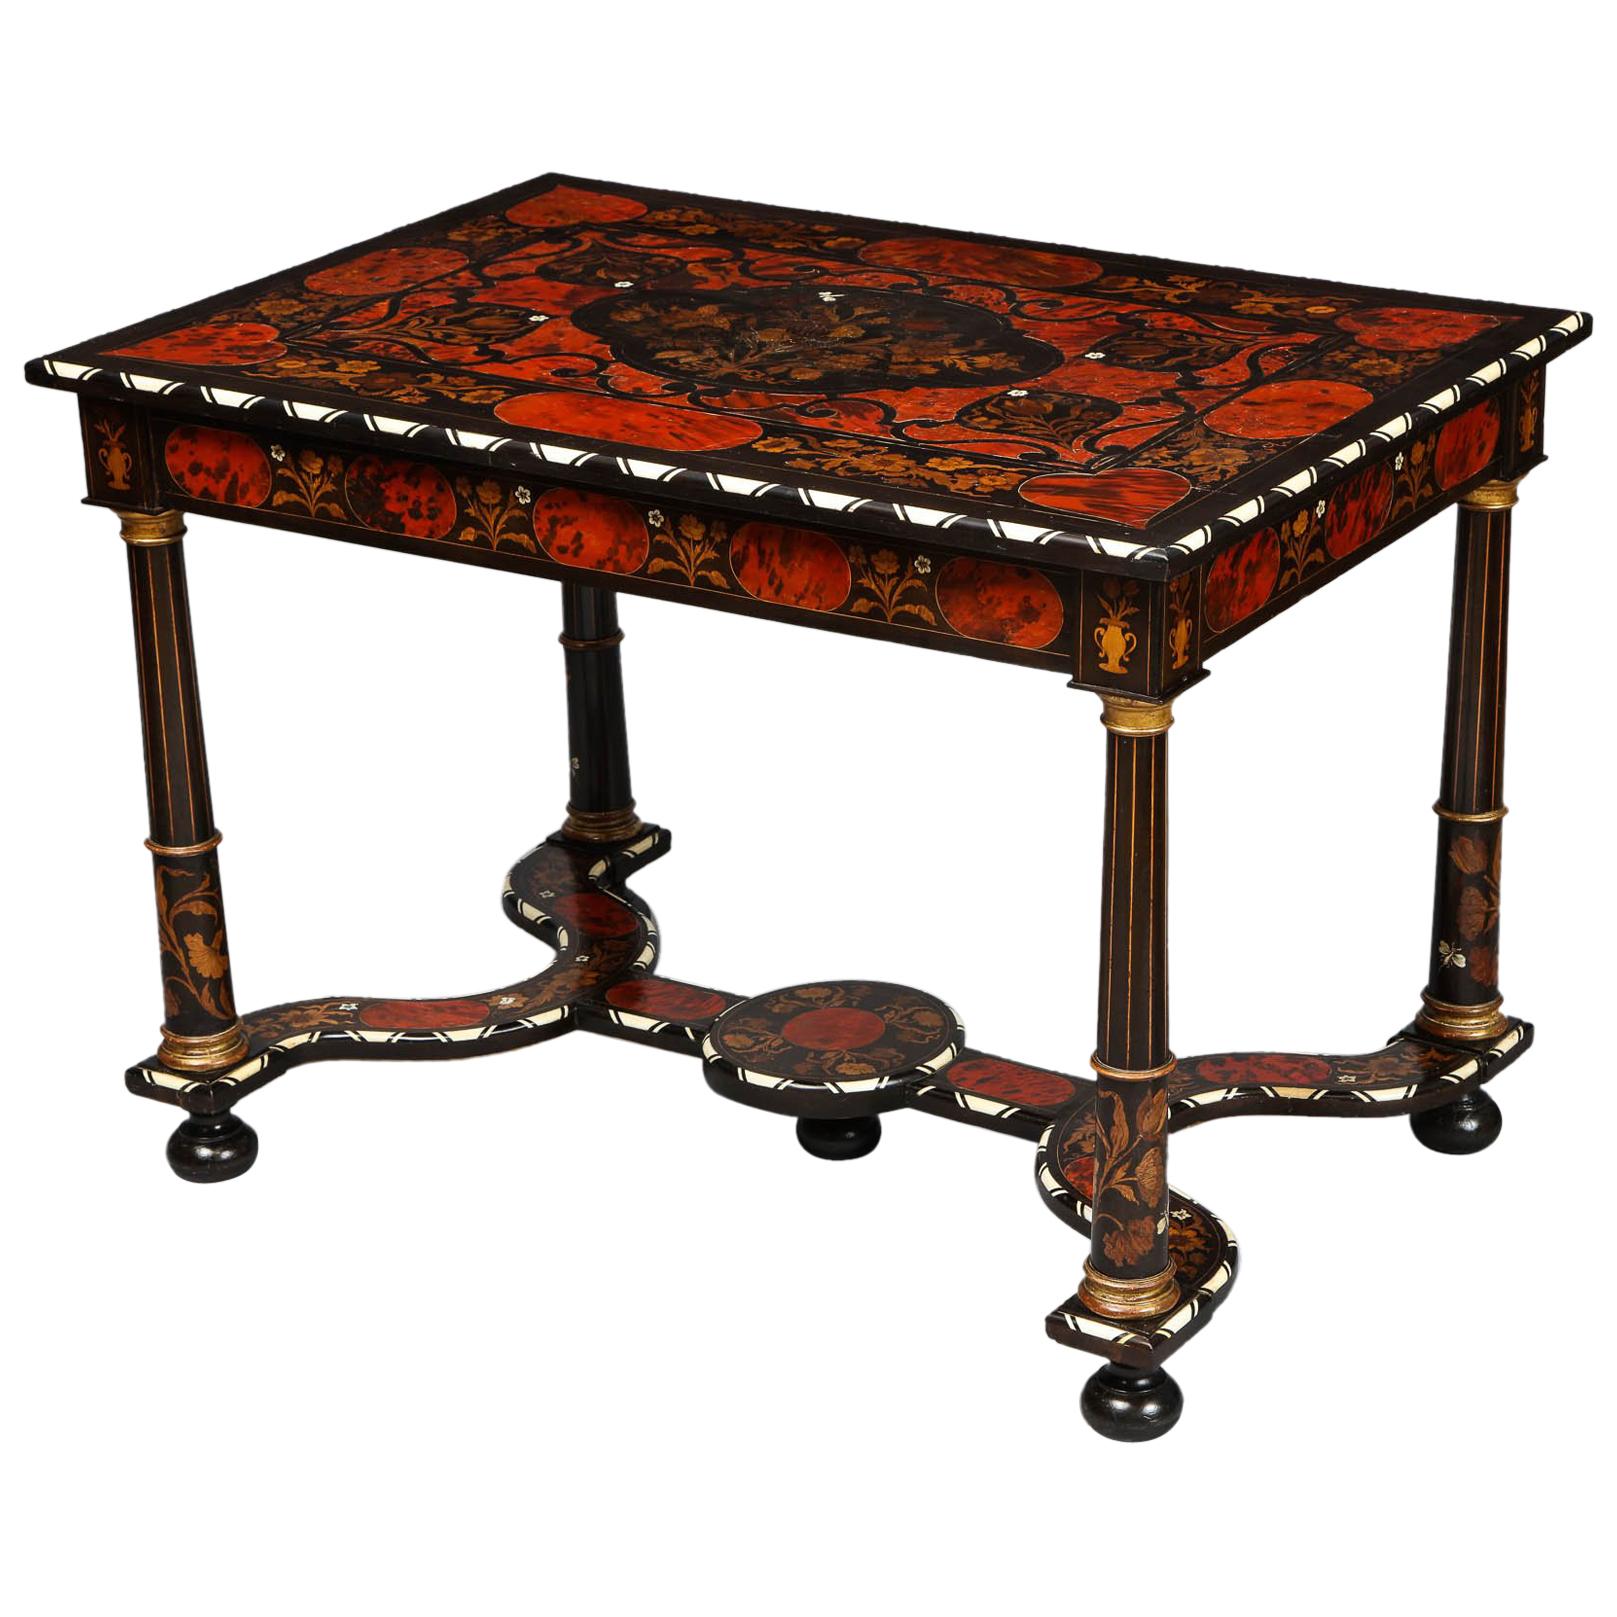 Flemish Baroque Marquetry Decorated Table For Sale